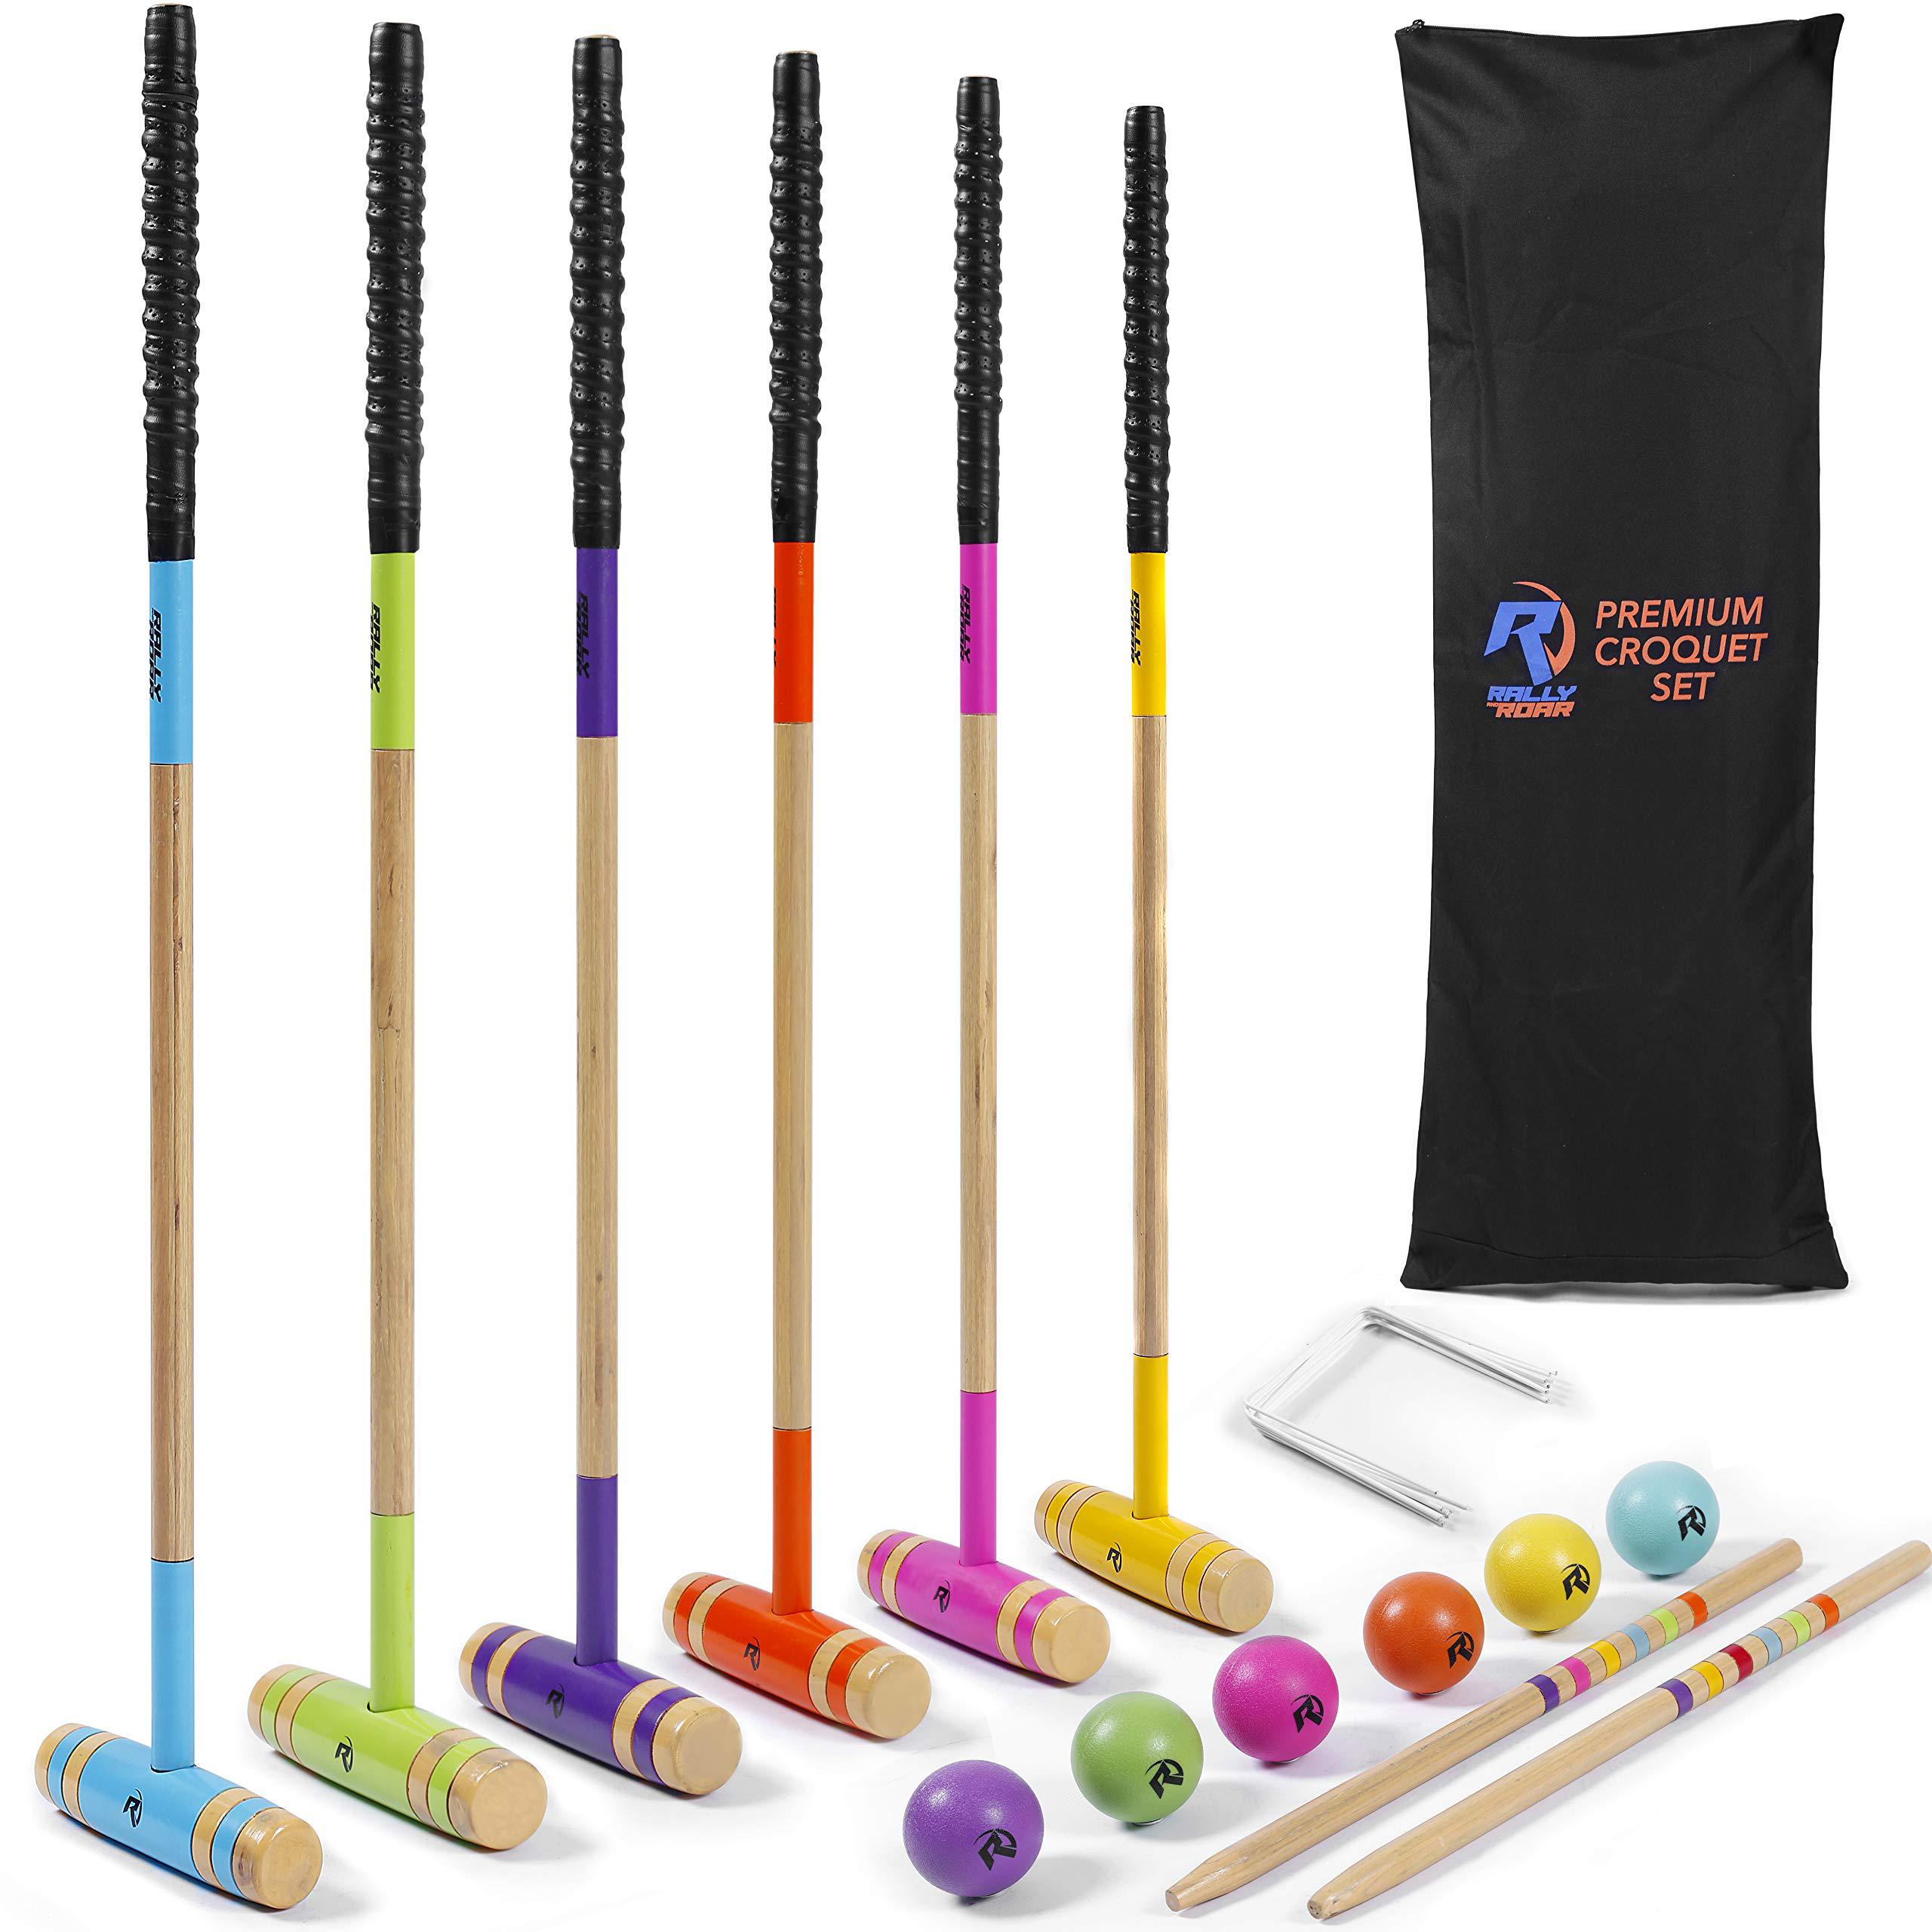 rally and roar deluxe croquet game set w/carry bag - 6 players 35" mallets, 9 wickets, 2 end posts